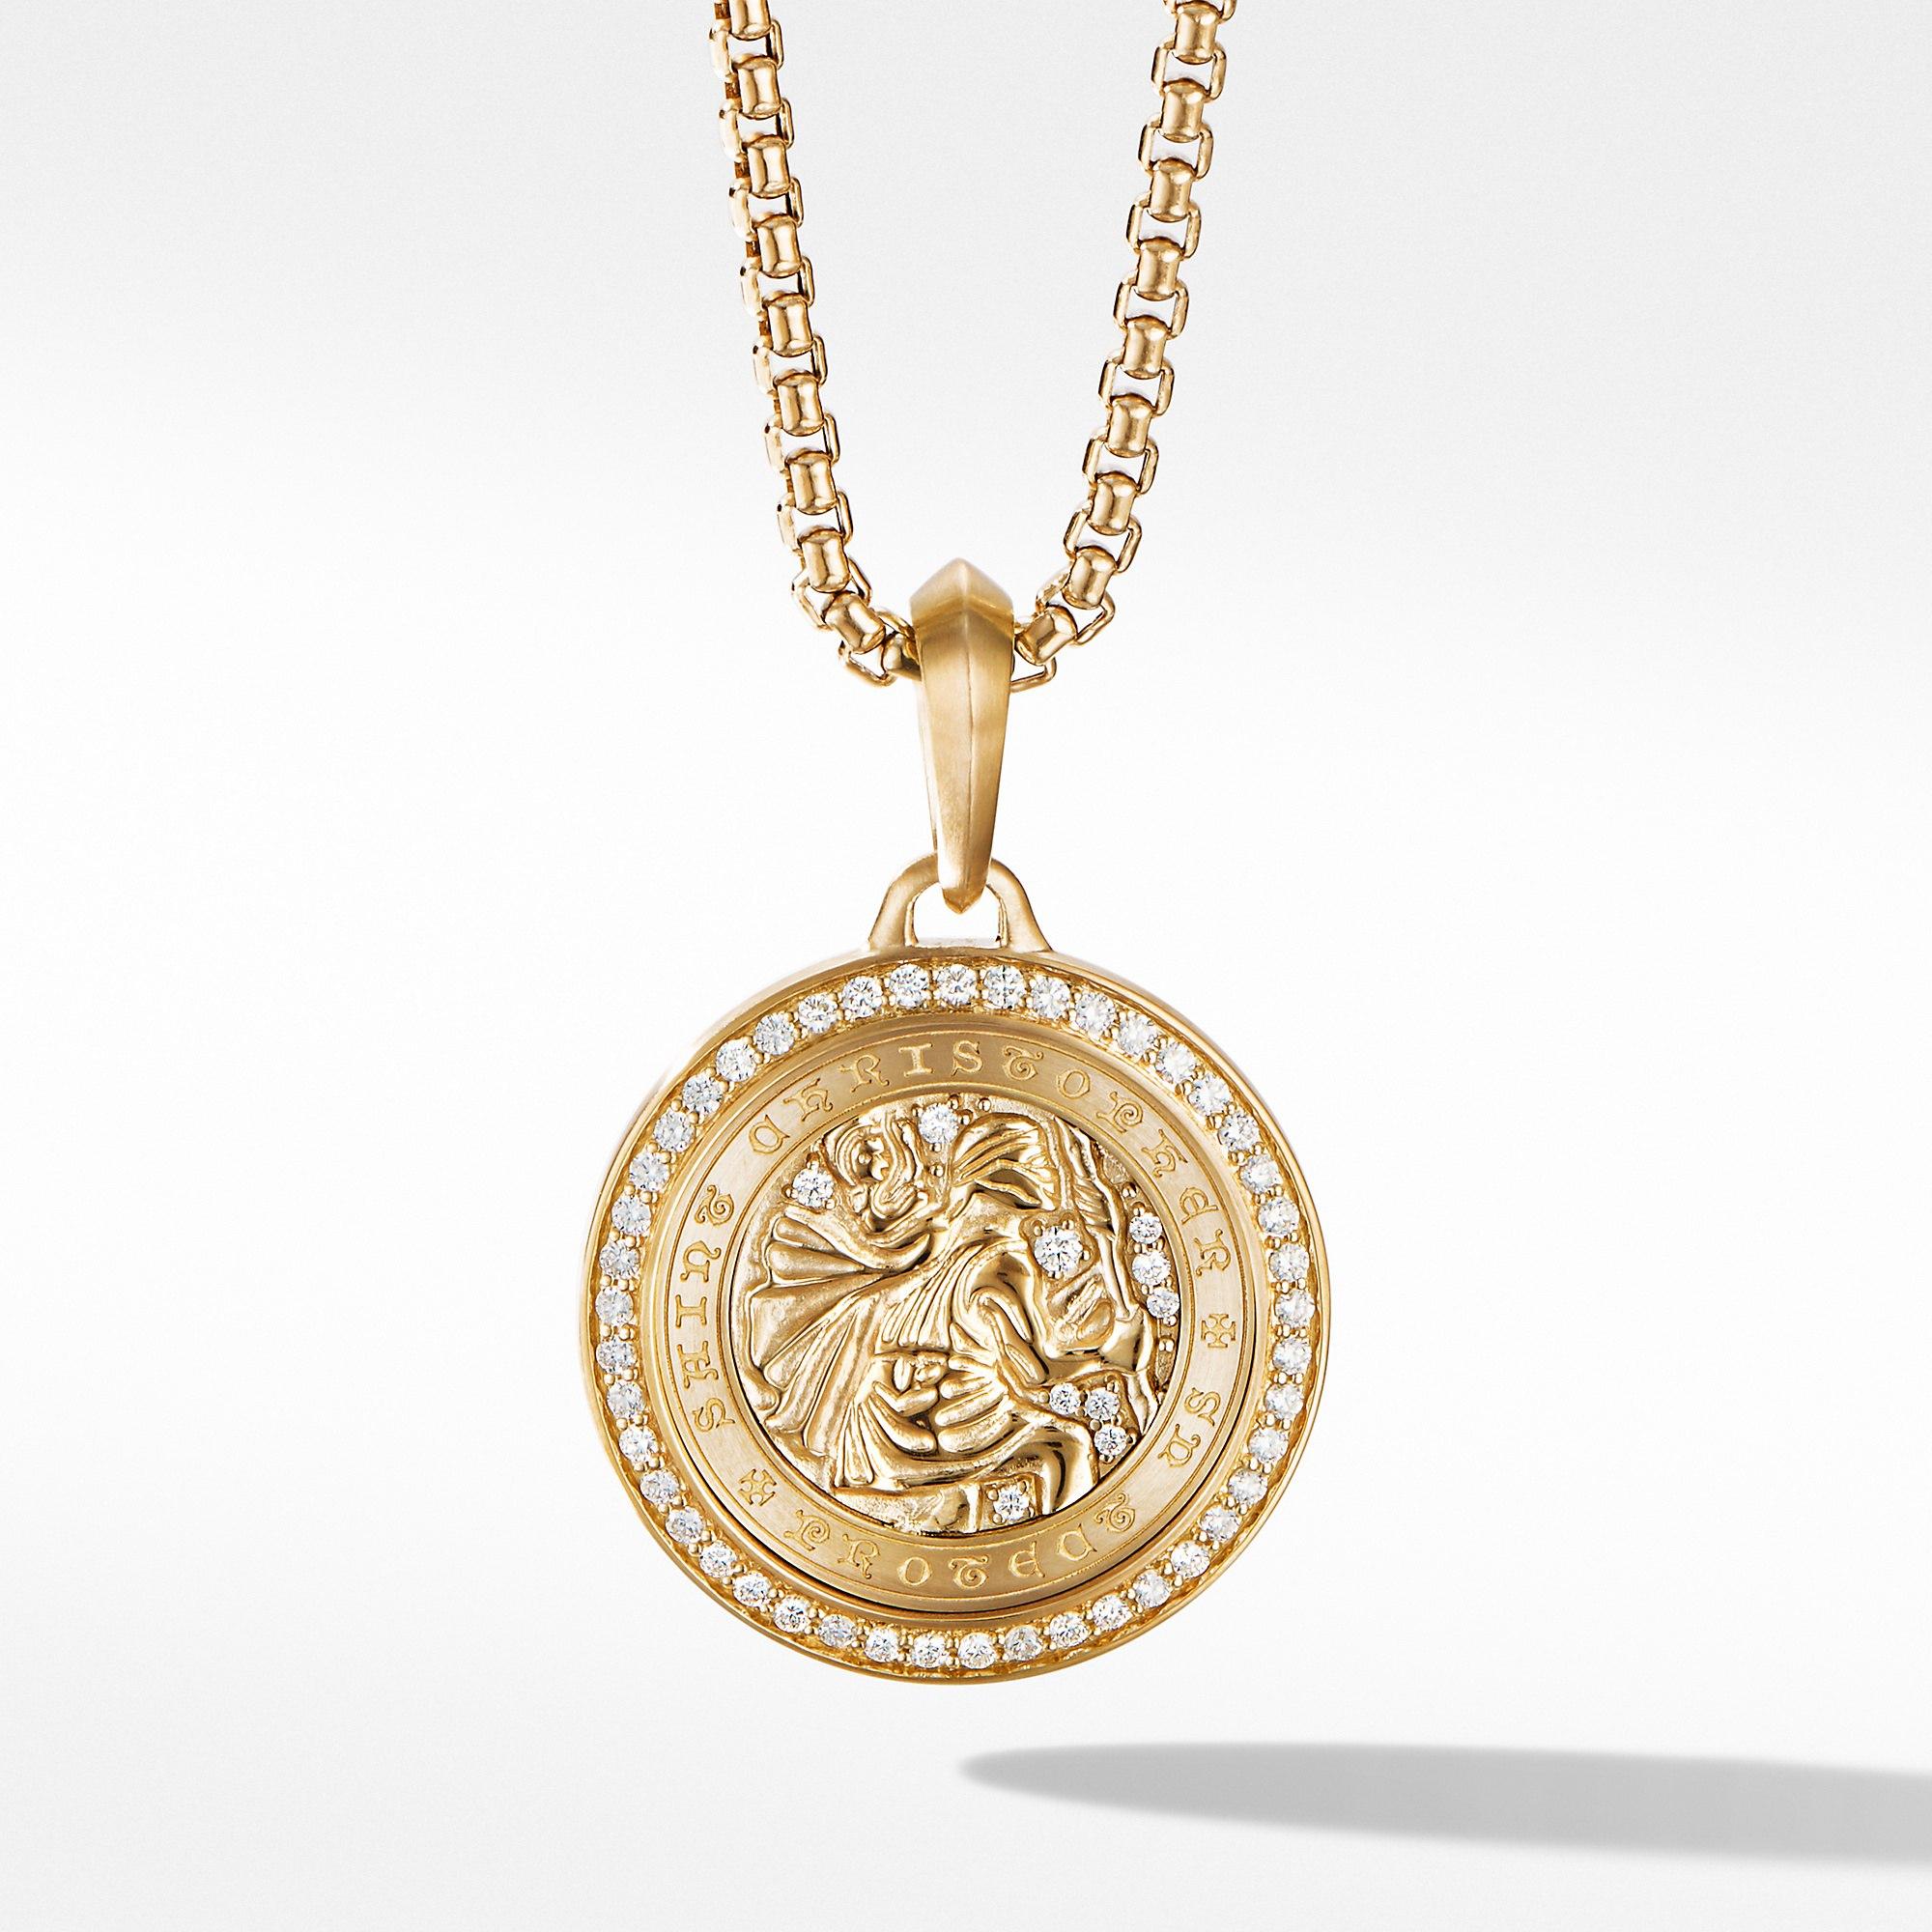 David Yurman Mens St. Christopher Amulet in 18k Yellow Gold with Pave Diamonds